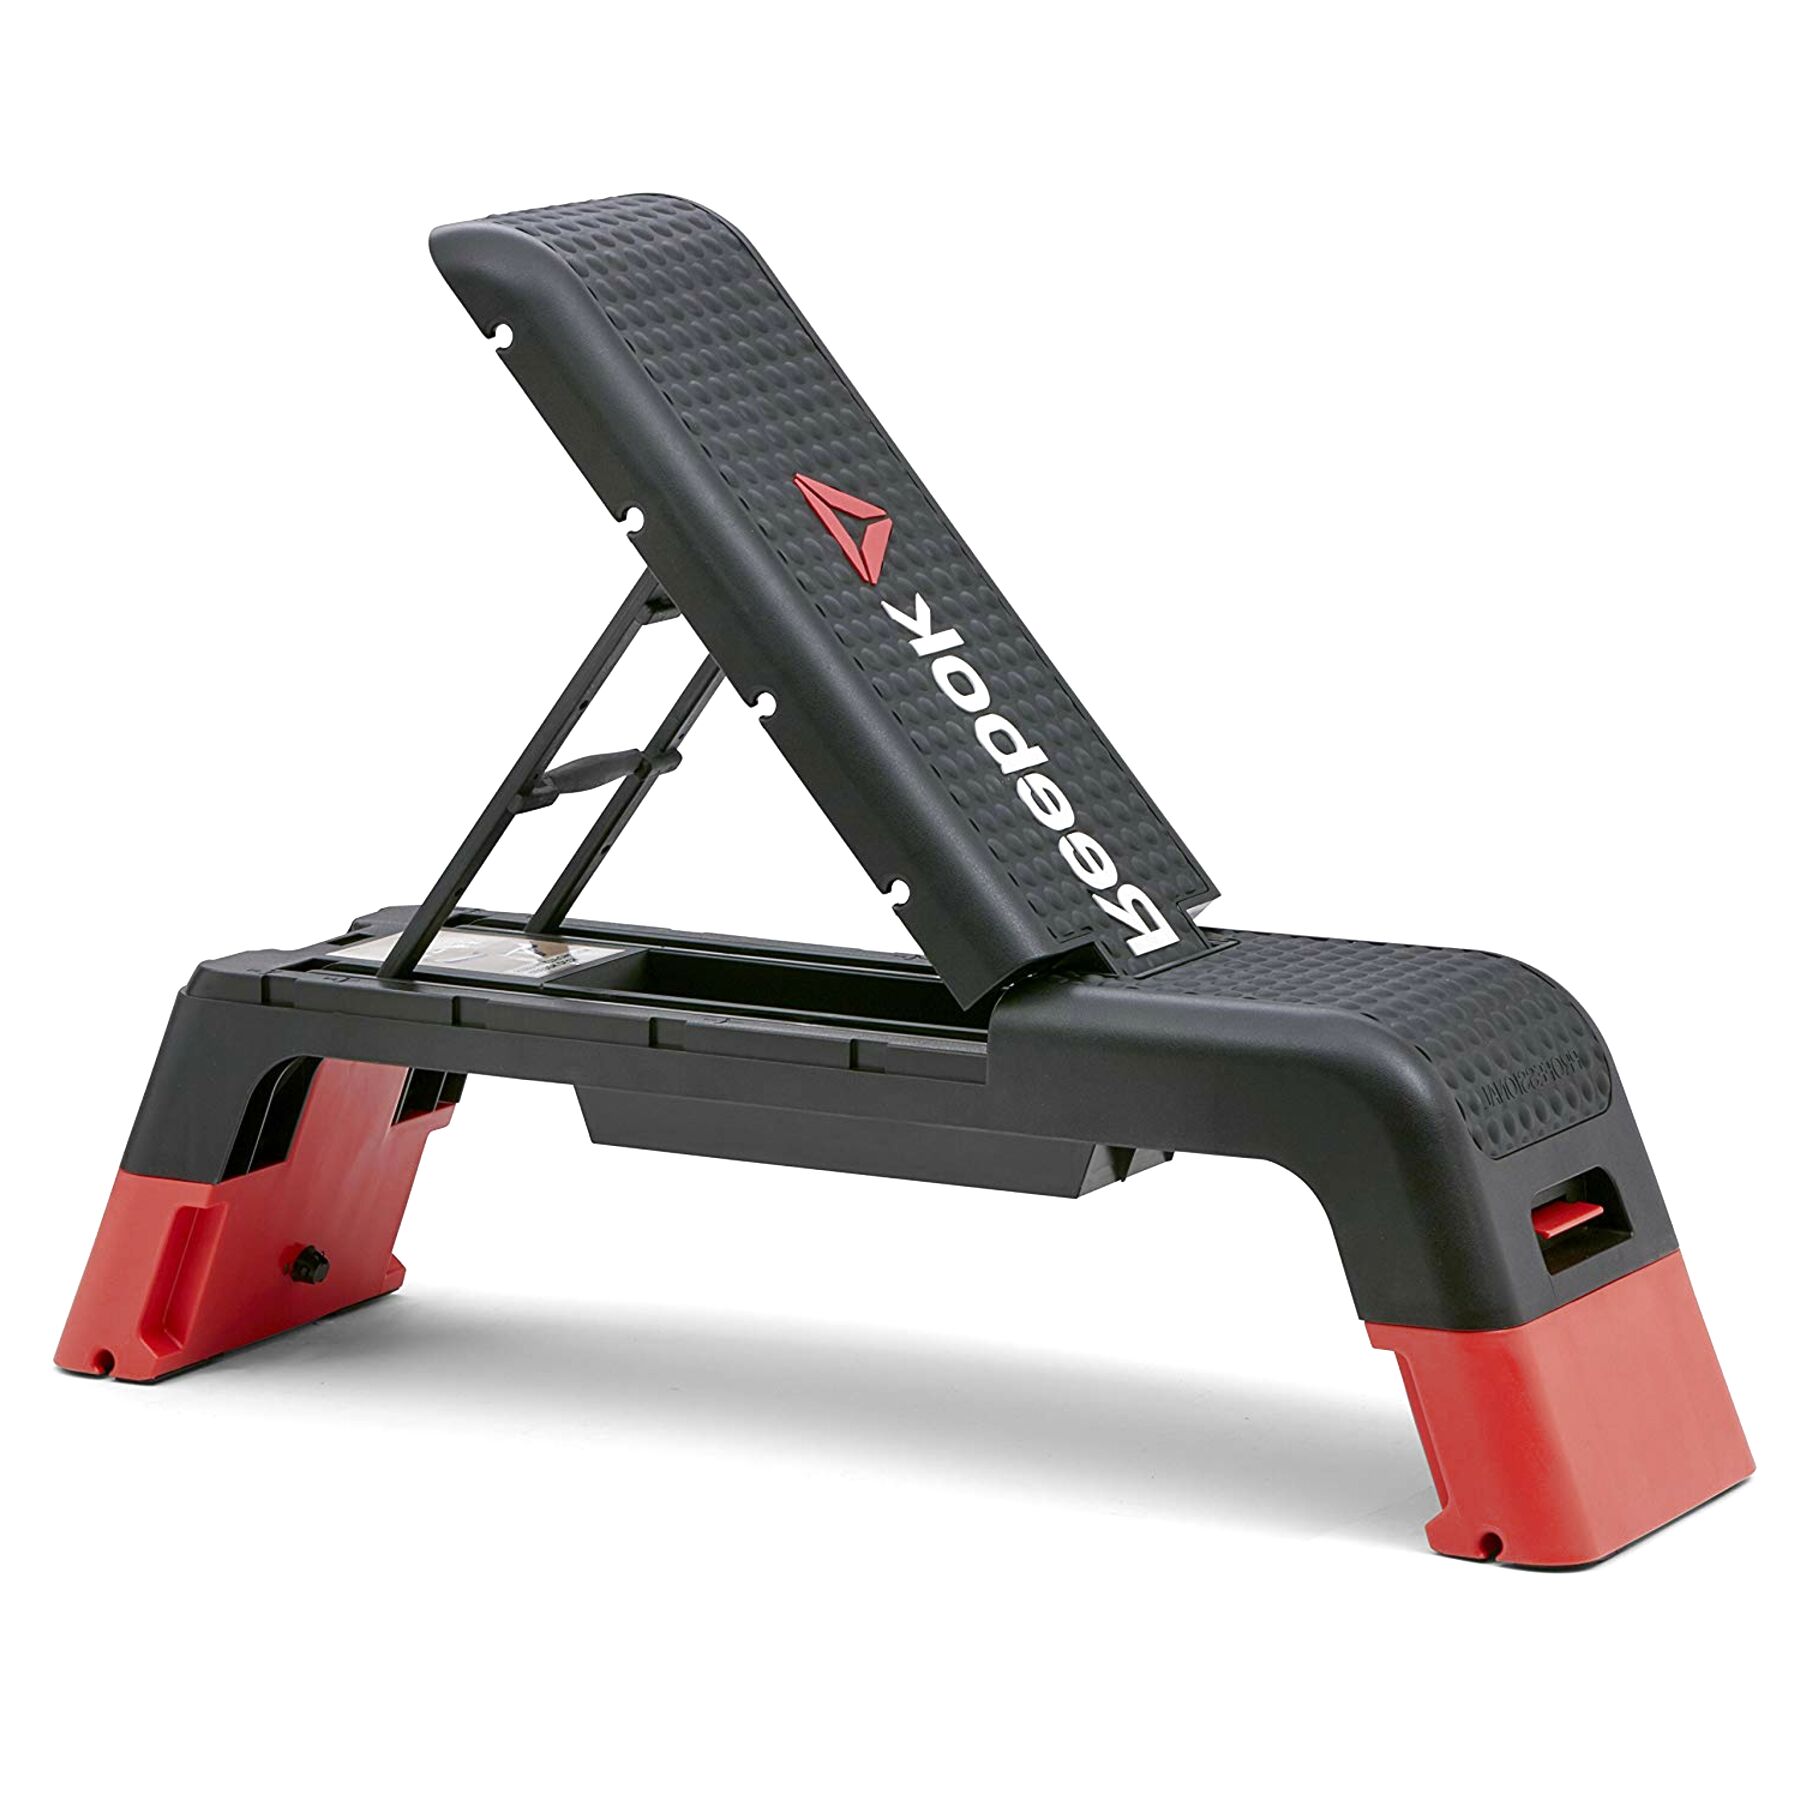 Reebok Deck Bench for sale in UK | View 